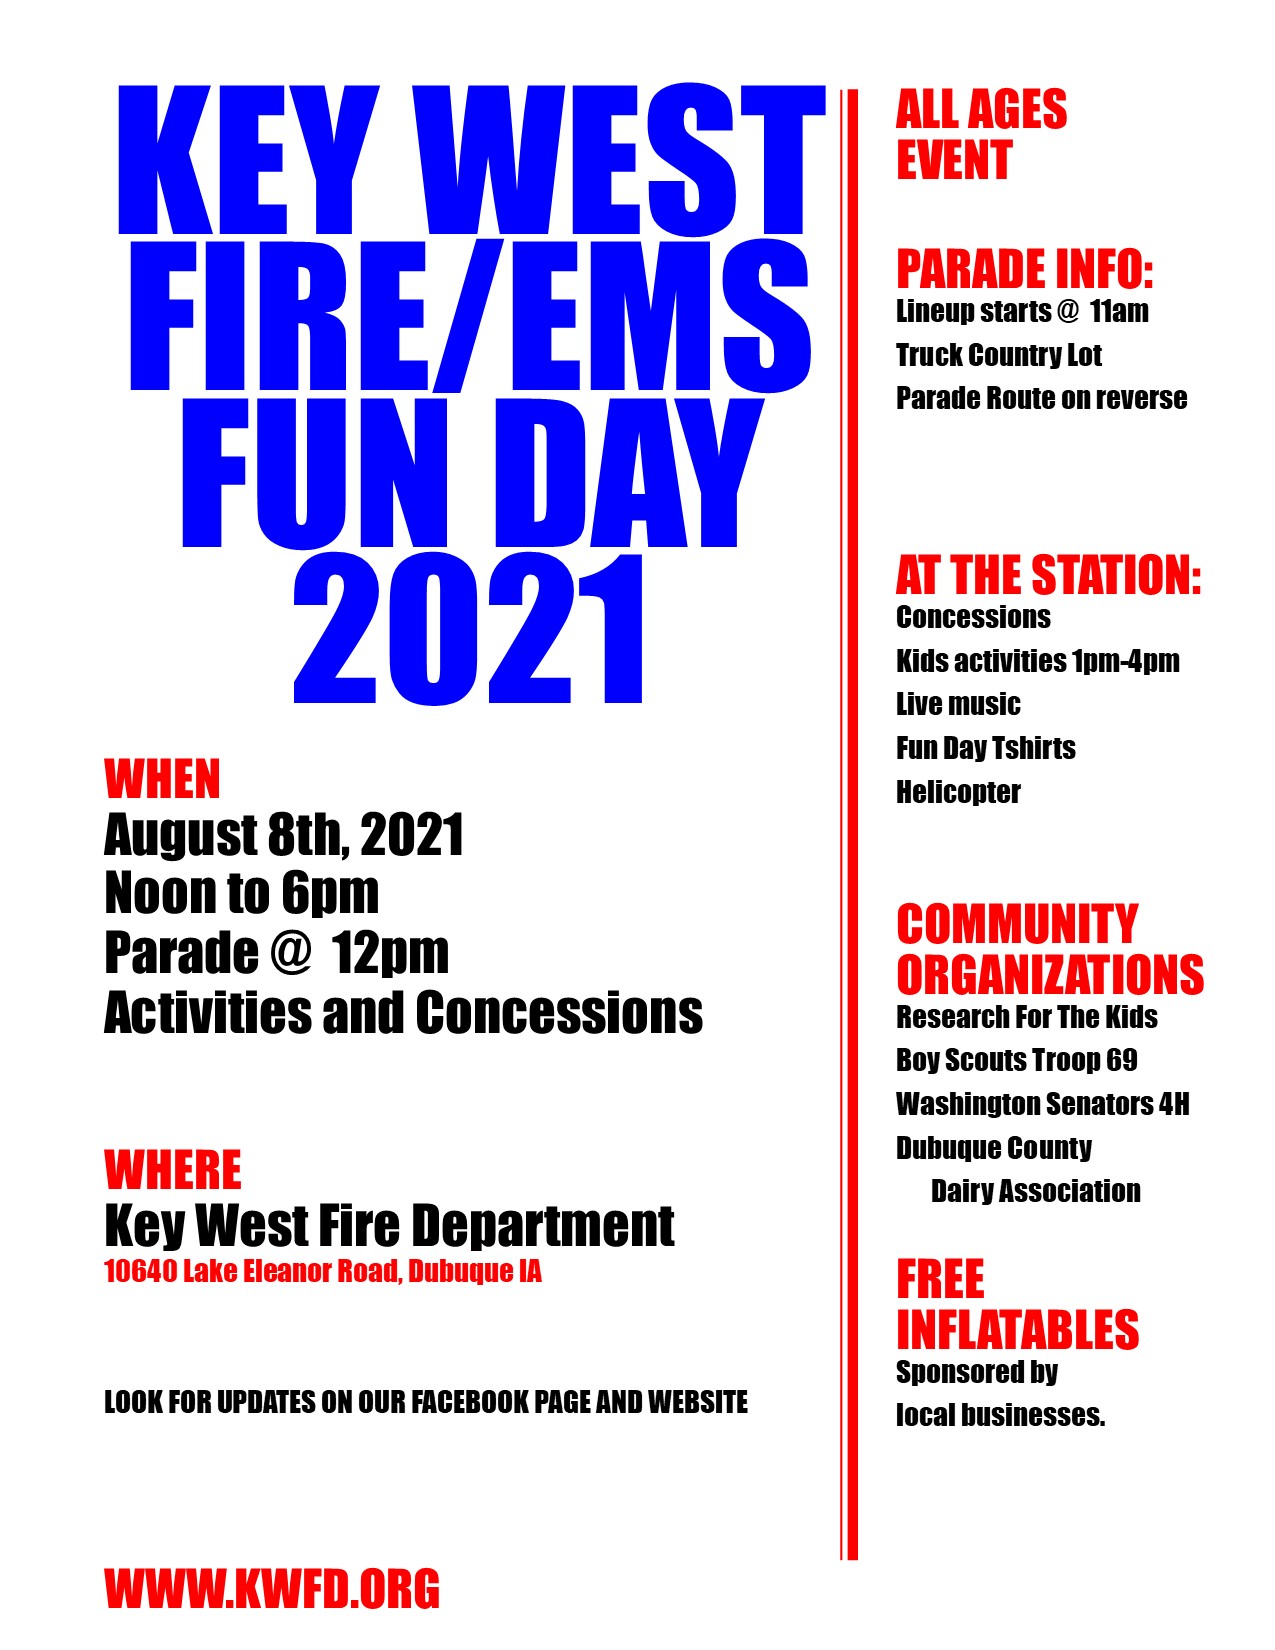 Fun Day Flyer Information: August 8, 2021 Noon-6pm All Ages Event, Parade at noon, Activities and concessions to follow.